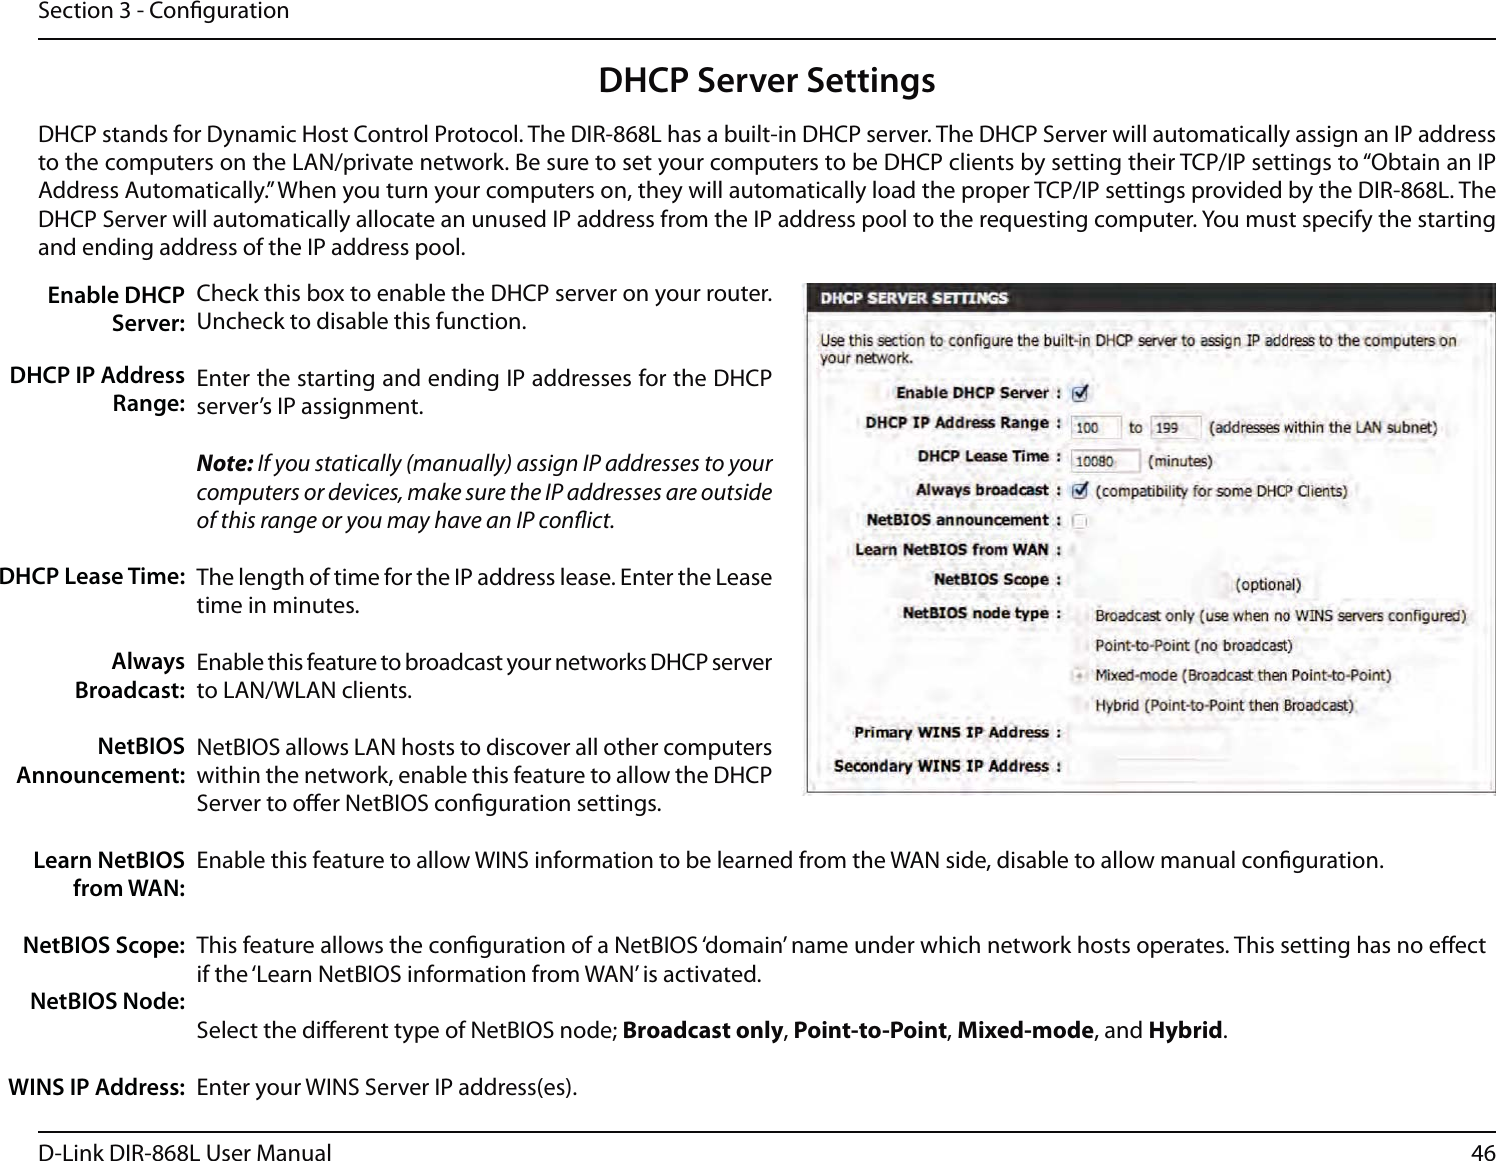 46D-Link DIR-868L User ManualSection 3 - CongurationDHCP Server SettingsDHCP stands for Dynamic Host Control Protocol. The DIR-868L has a built-in DHCP server. The DHCP Server will automatically assign an IP address to the computers on the LAN/private network. Be sure to set your computers to be DHCP clients by setting their TCP/IP settings to “Obtain an IP Address Automatically.” When you turn your computers on, they will automatically load the proper TCP/IP settings provided by the DIR-868L. The DHCP Server will automatically allocate an unused IP address from the IP address pool to the requesting computer. You must specify the starting and ending address of the IP address pool.Check this box to enable the DHCP server on your router. Uncheck to disable this function.Enter the starting and ending IP addresses for the DHCP server’s IP assignment.Note: If you statically (manually) assign IP addresses to your computers or devices, make sure the IP addresses are outside of this range or you may have an IP conict. The length of time for the IP address lease. Enter the Lease time in minutes.Enable this feature to broadcast your networks DHCP server to LAN/WLAN clients.NetBIOS allows LAN hosts to discover all other computers within the network, enable this feature to allow the DHCP Server to oer NetBIOS conguration settings.Enable this feature to allow WINS information to be learned from the WAN side, disable to allow manual conguration.This feature allows the conguration of a NetBIOS ‘domain’ name under which network hosts operates. This setting has no eect if the ‘Learn NetBIOS information from WAN’ is activated.Select the dierent type of NetBIOS node; Broadcast only, Point-to-Point, Mixed-mode, and Hybrid.Enter your WINS Server IP address(es).Enable DHCP Server:DHCP IP Address Range:DHCP Lease Time:Always Broadcast:NetBIOS Announcement:Learn NetBIOS from WAN:NetBIOS Scope:NetBIOS Node:WINS IP Address: